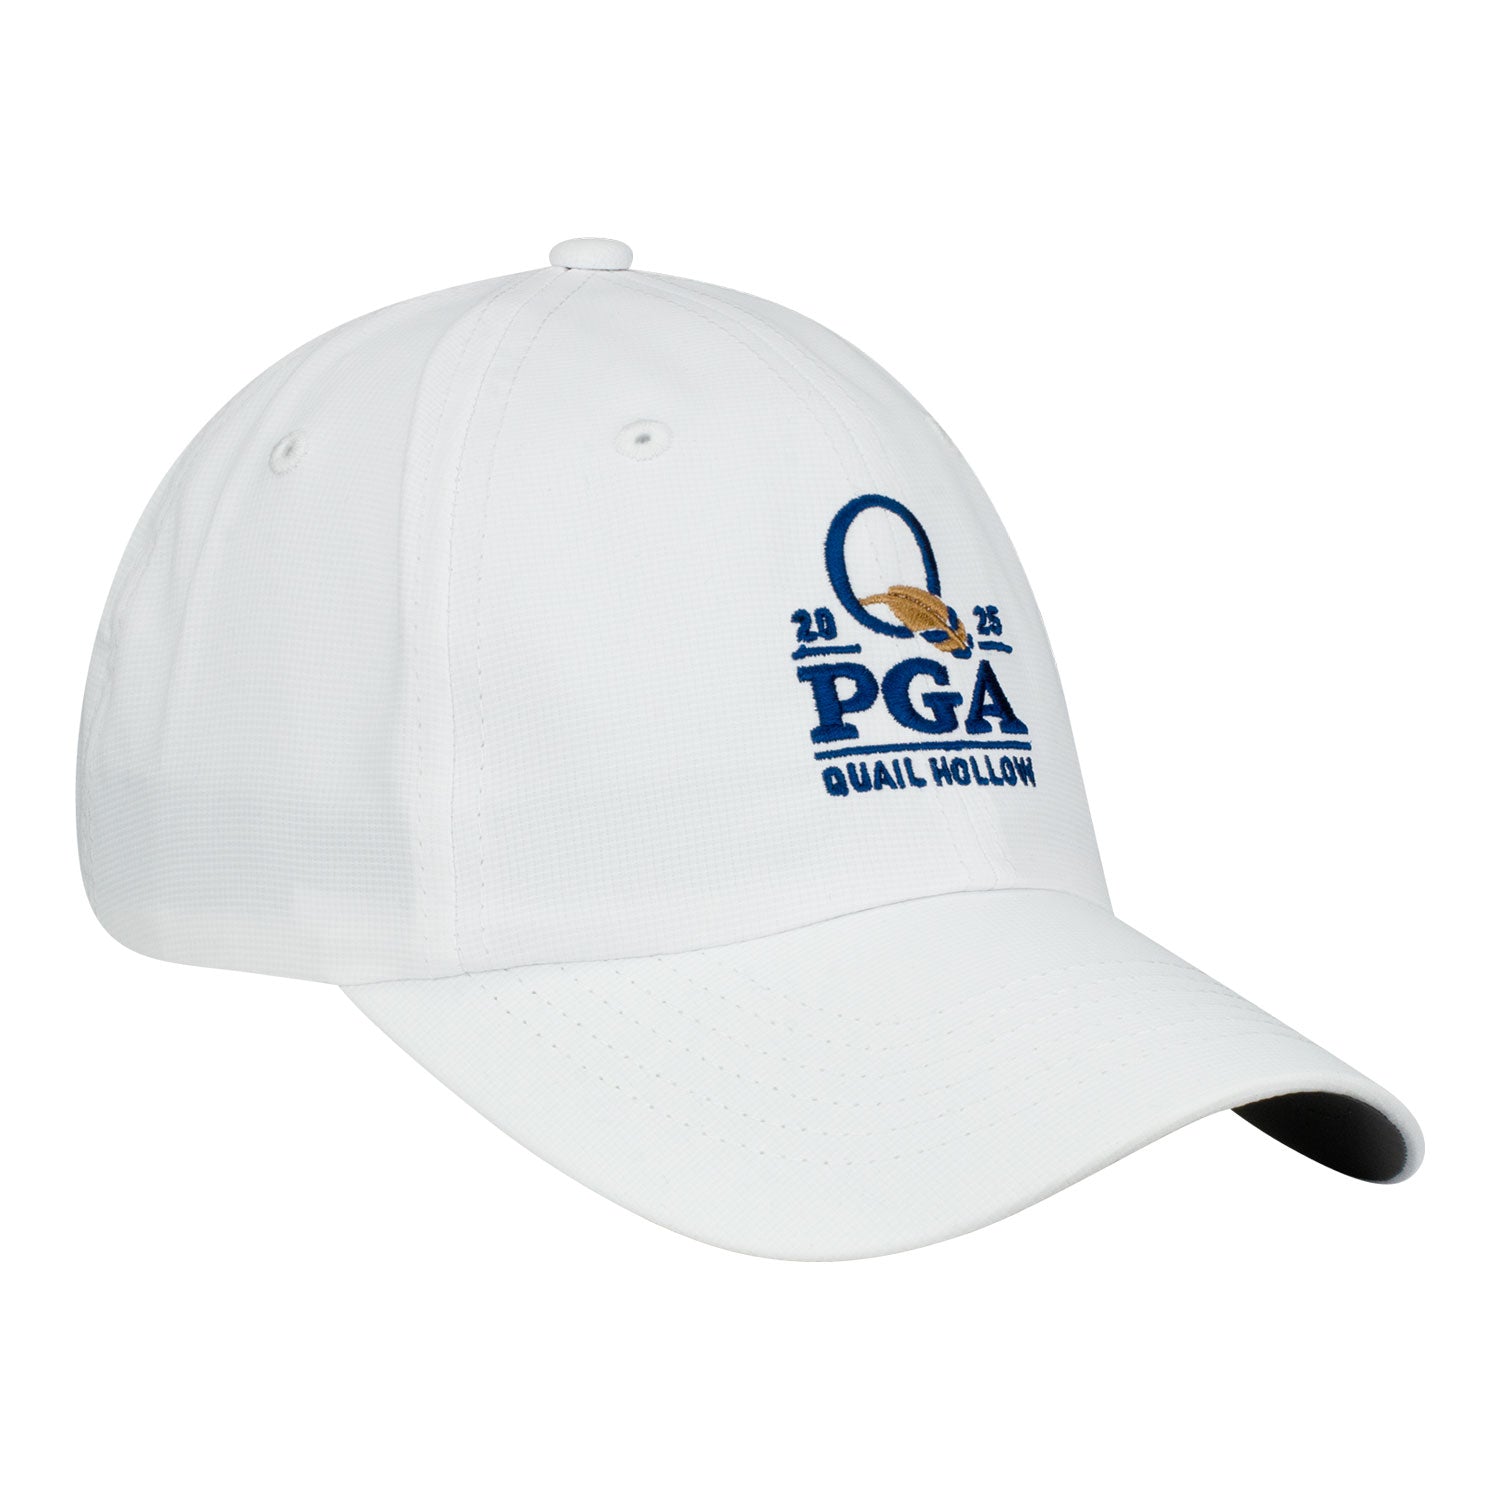 Imperial 2025 PGA Championship Original Performance Hat in White - Angled Front Left View